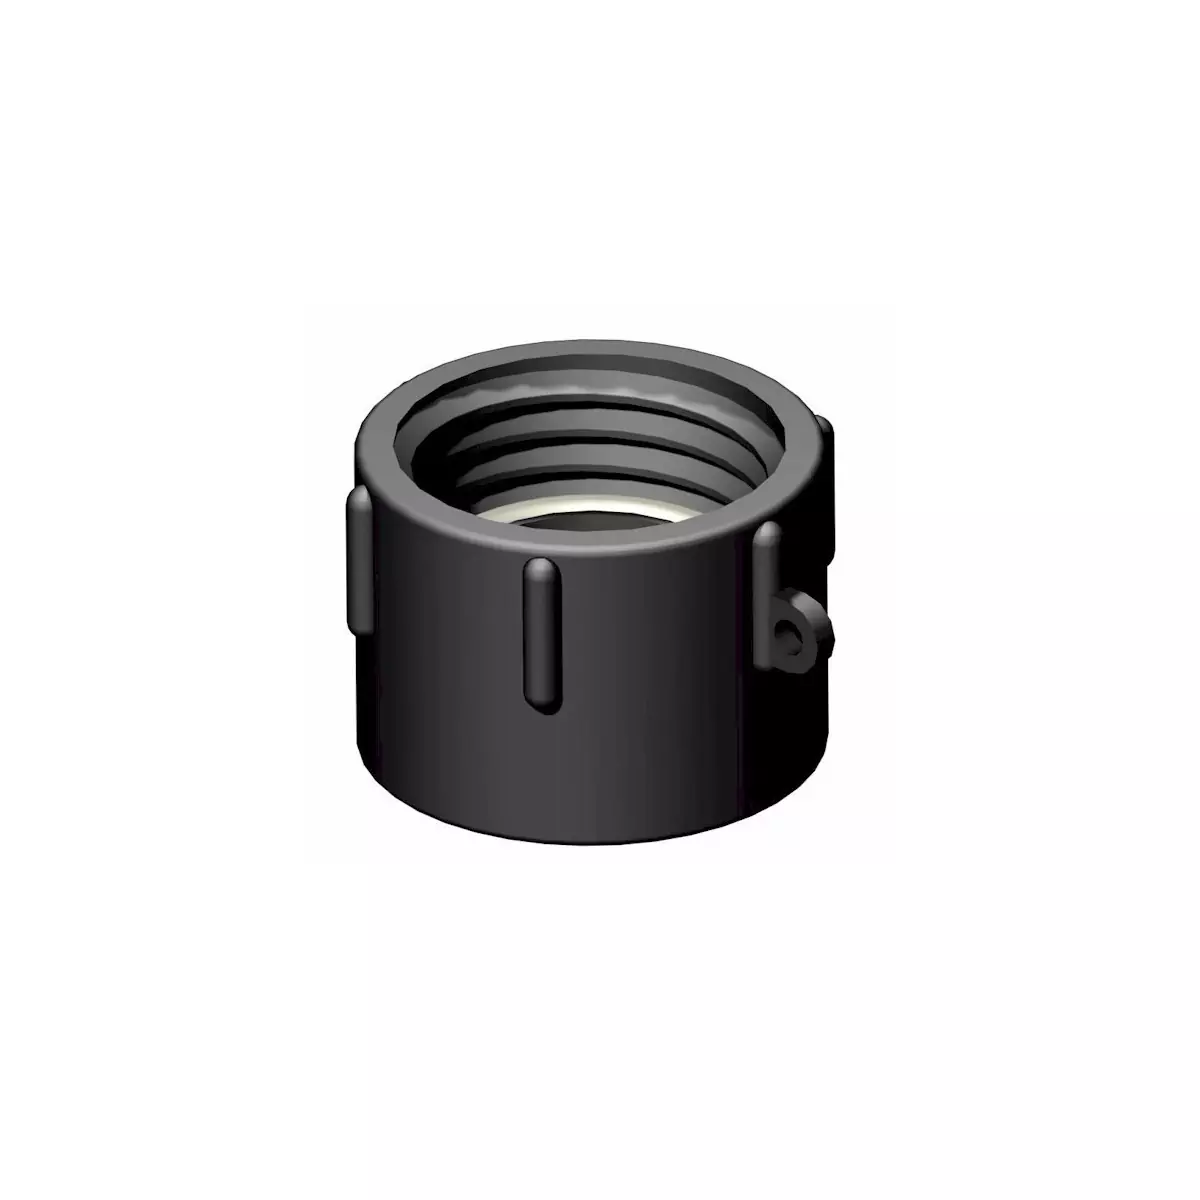 Product sheet Female 2 "S60x6 / female 1" 1/2 pitch gas fitting